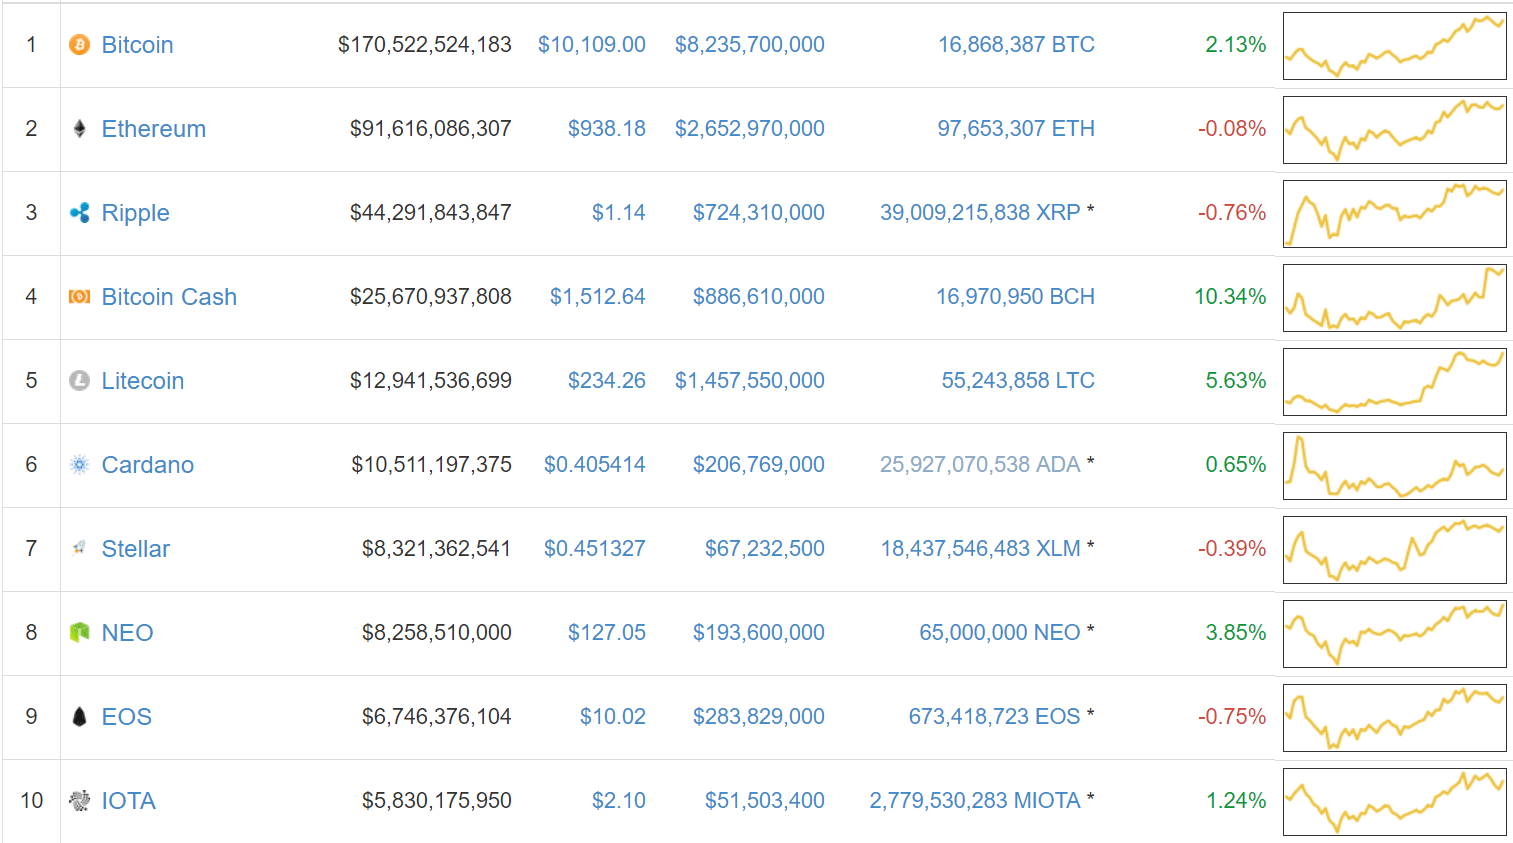 cryptocurrency top 10 prices 2/16/18